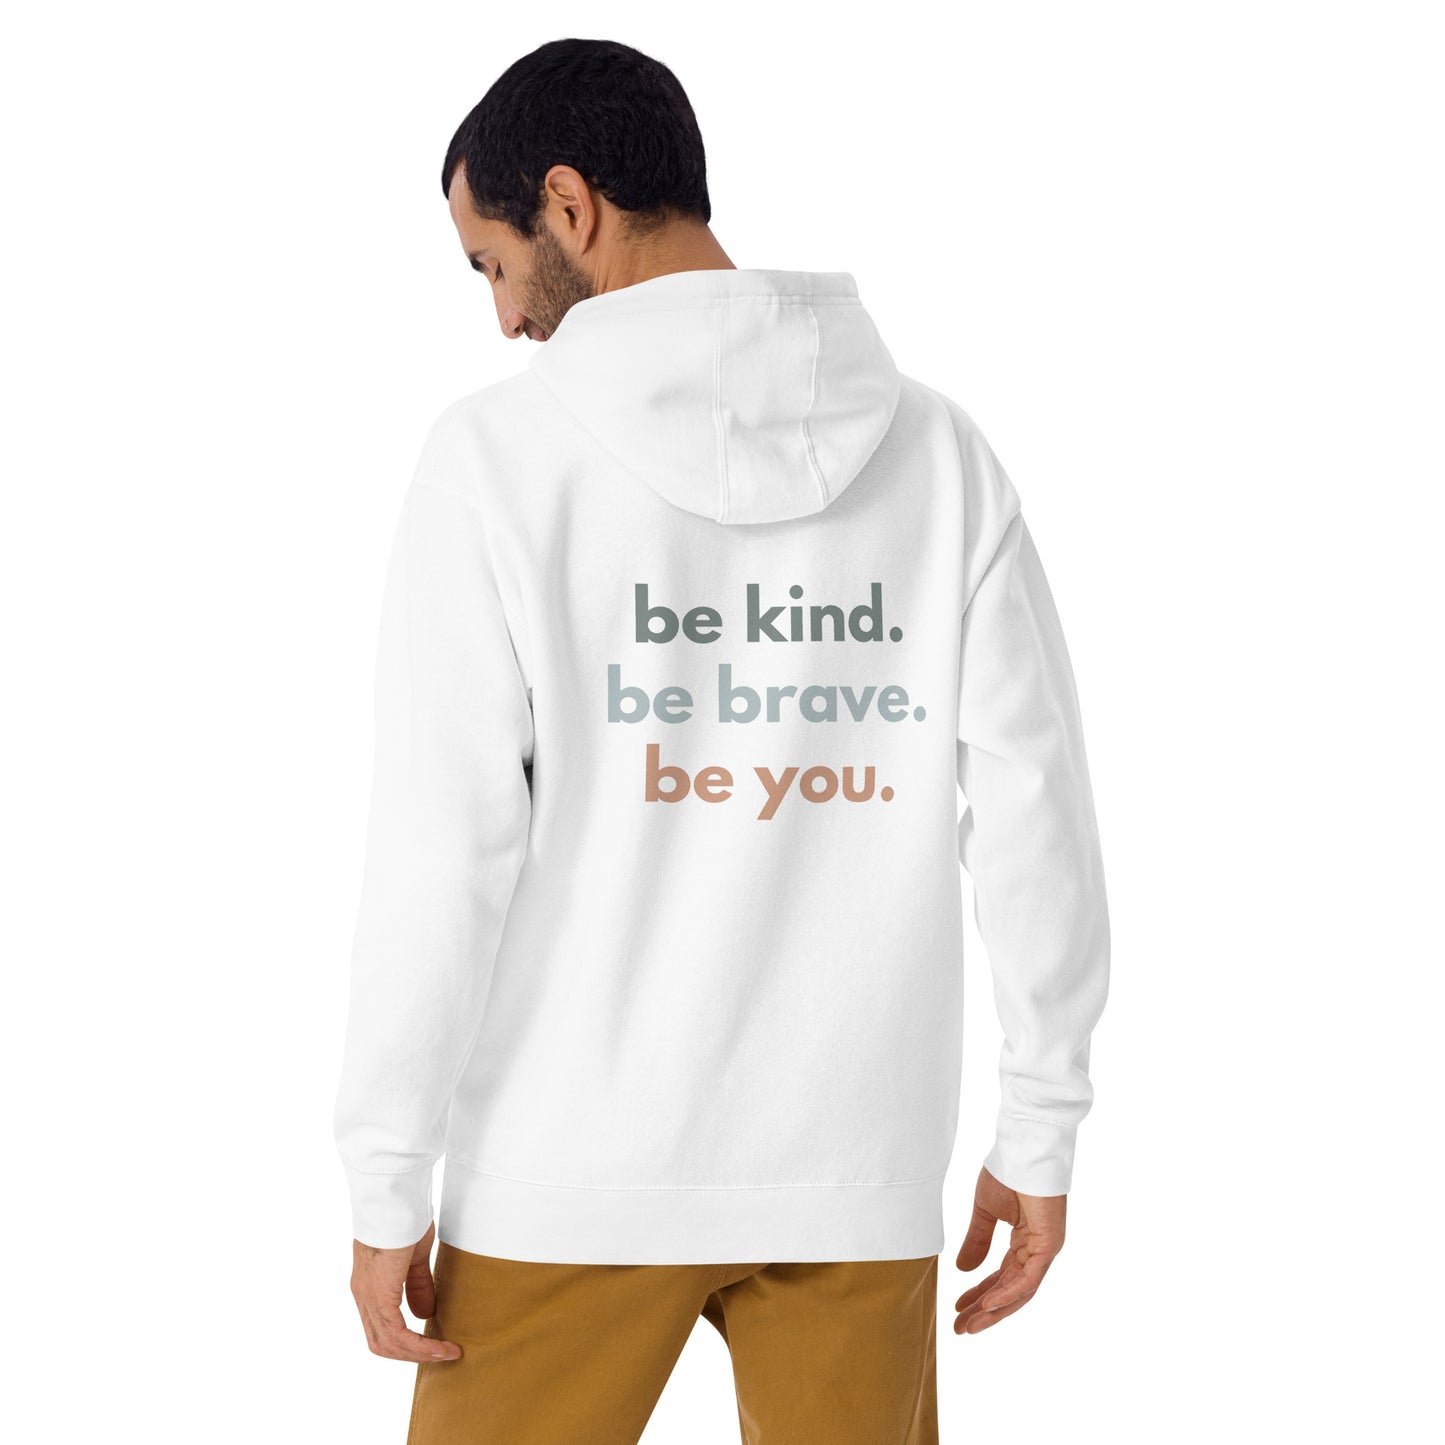 Unisex Hoodie - be kind. be brave. be you. (back)